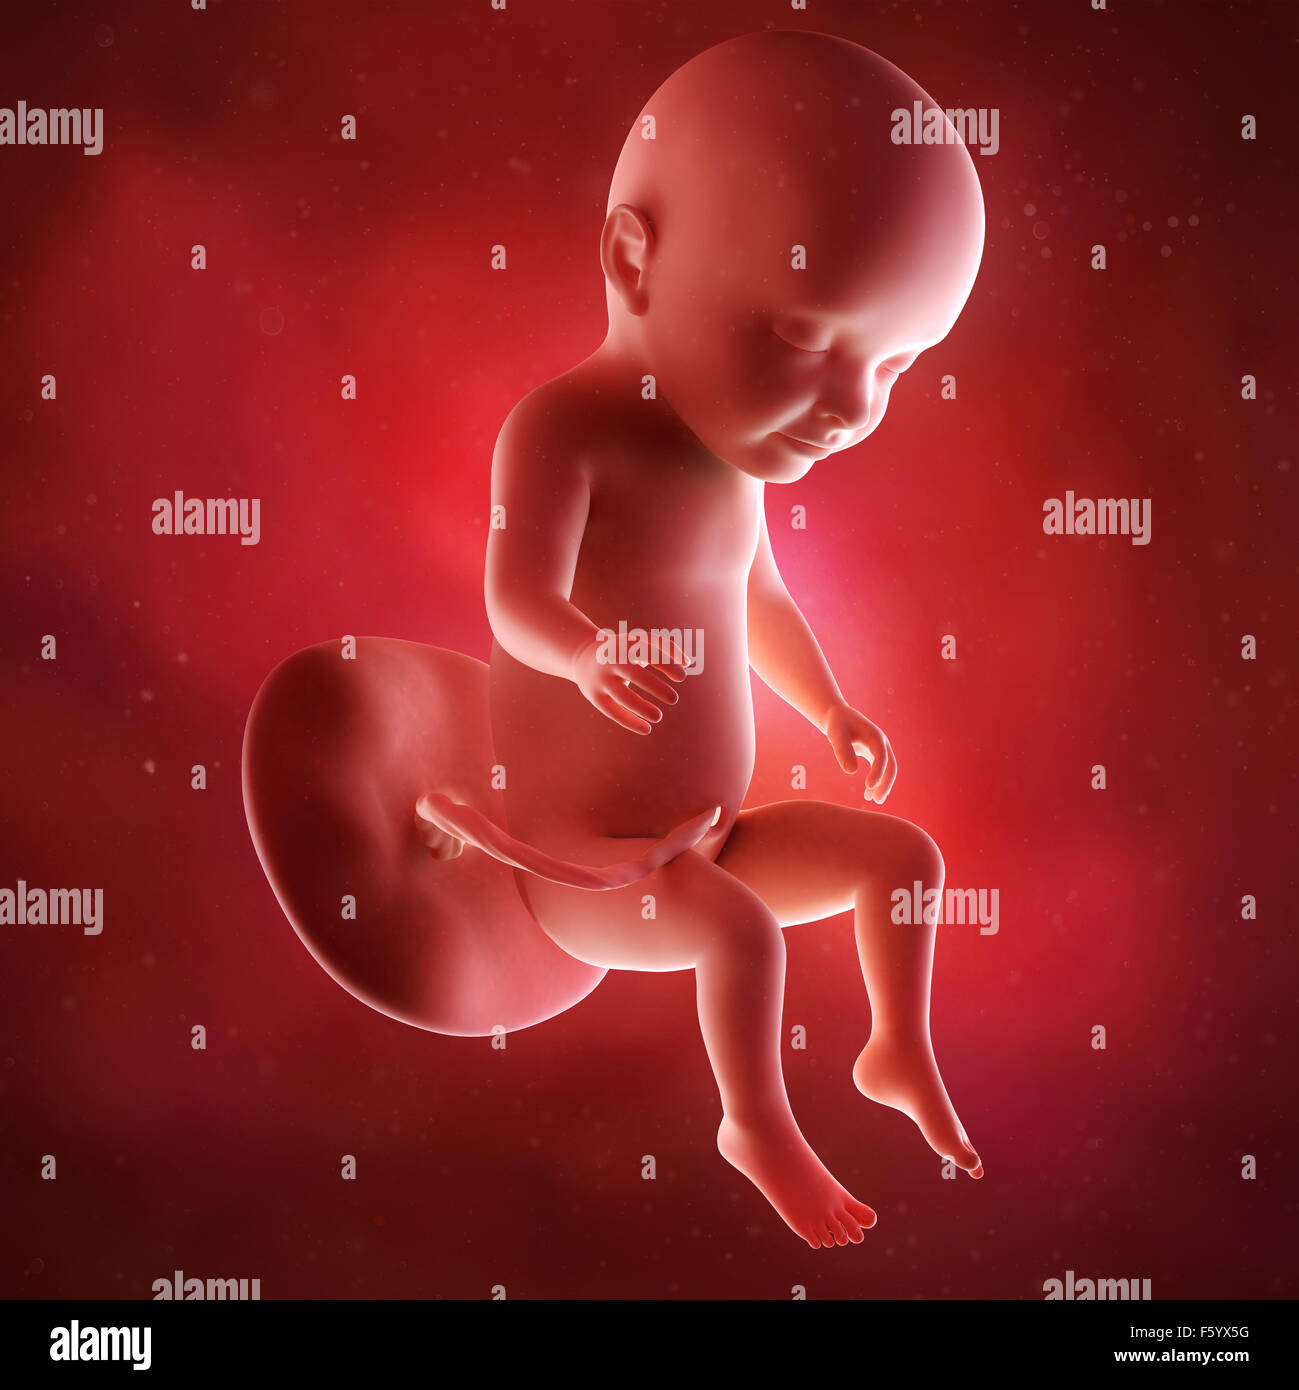 medical accurate 3d illustration of a fetus week 31 Stock Photo